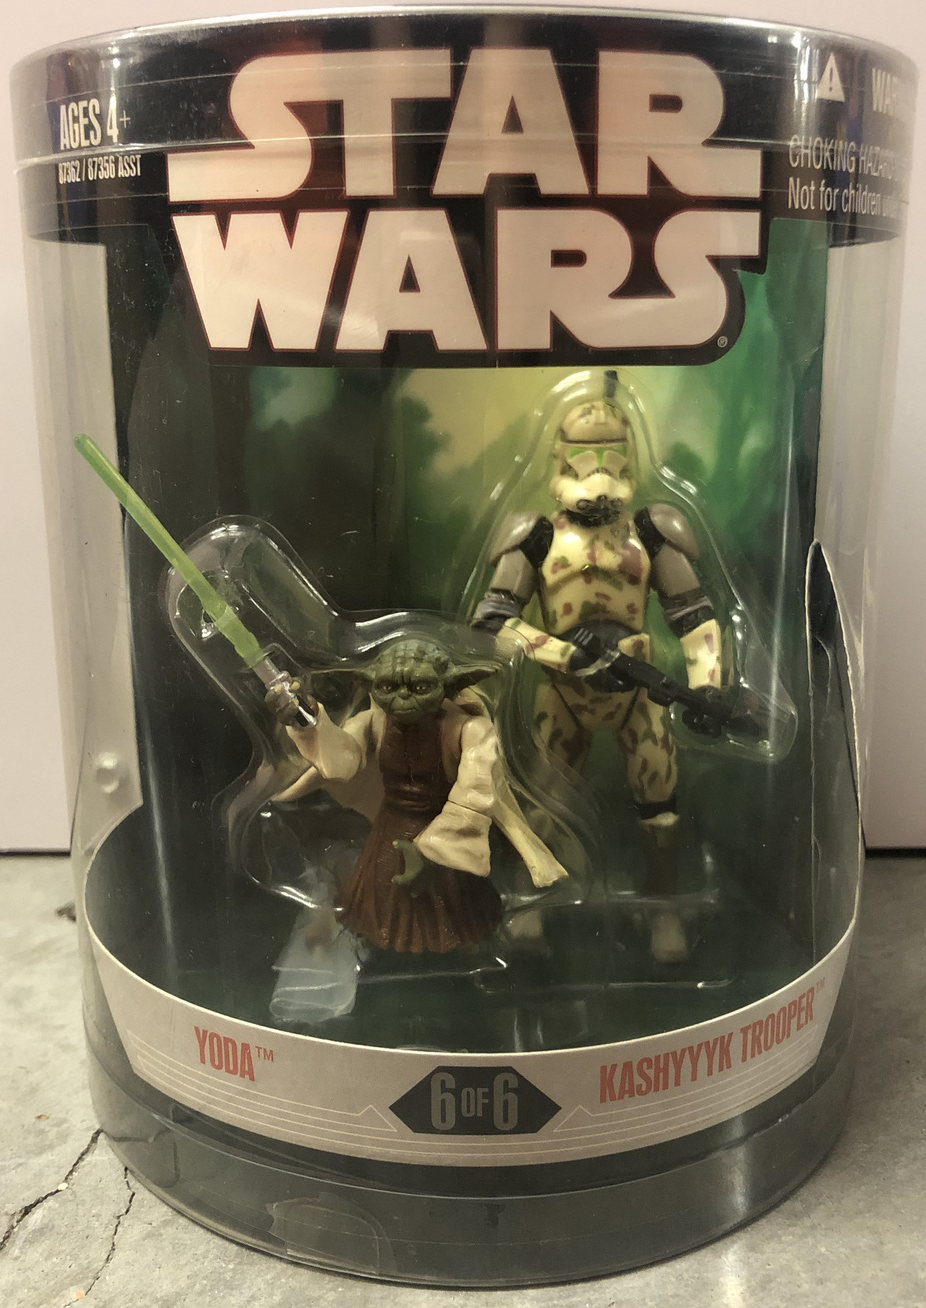 Primary image for  30TH ANNIVERSARY STAR WARS ORDER 66 TARGET EXCLUSIVE YODA AND KASHYYYK TROOPER